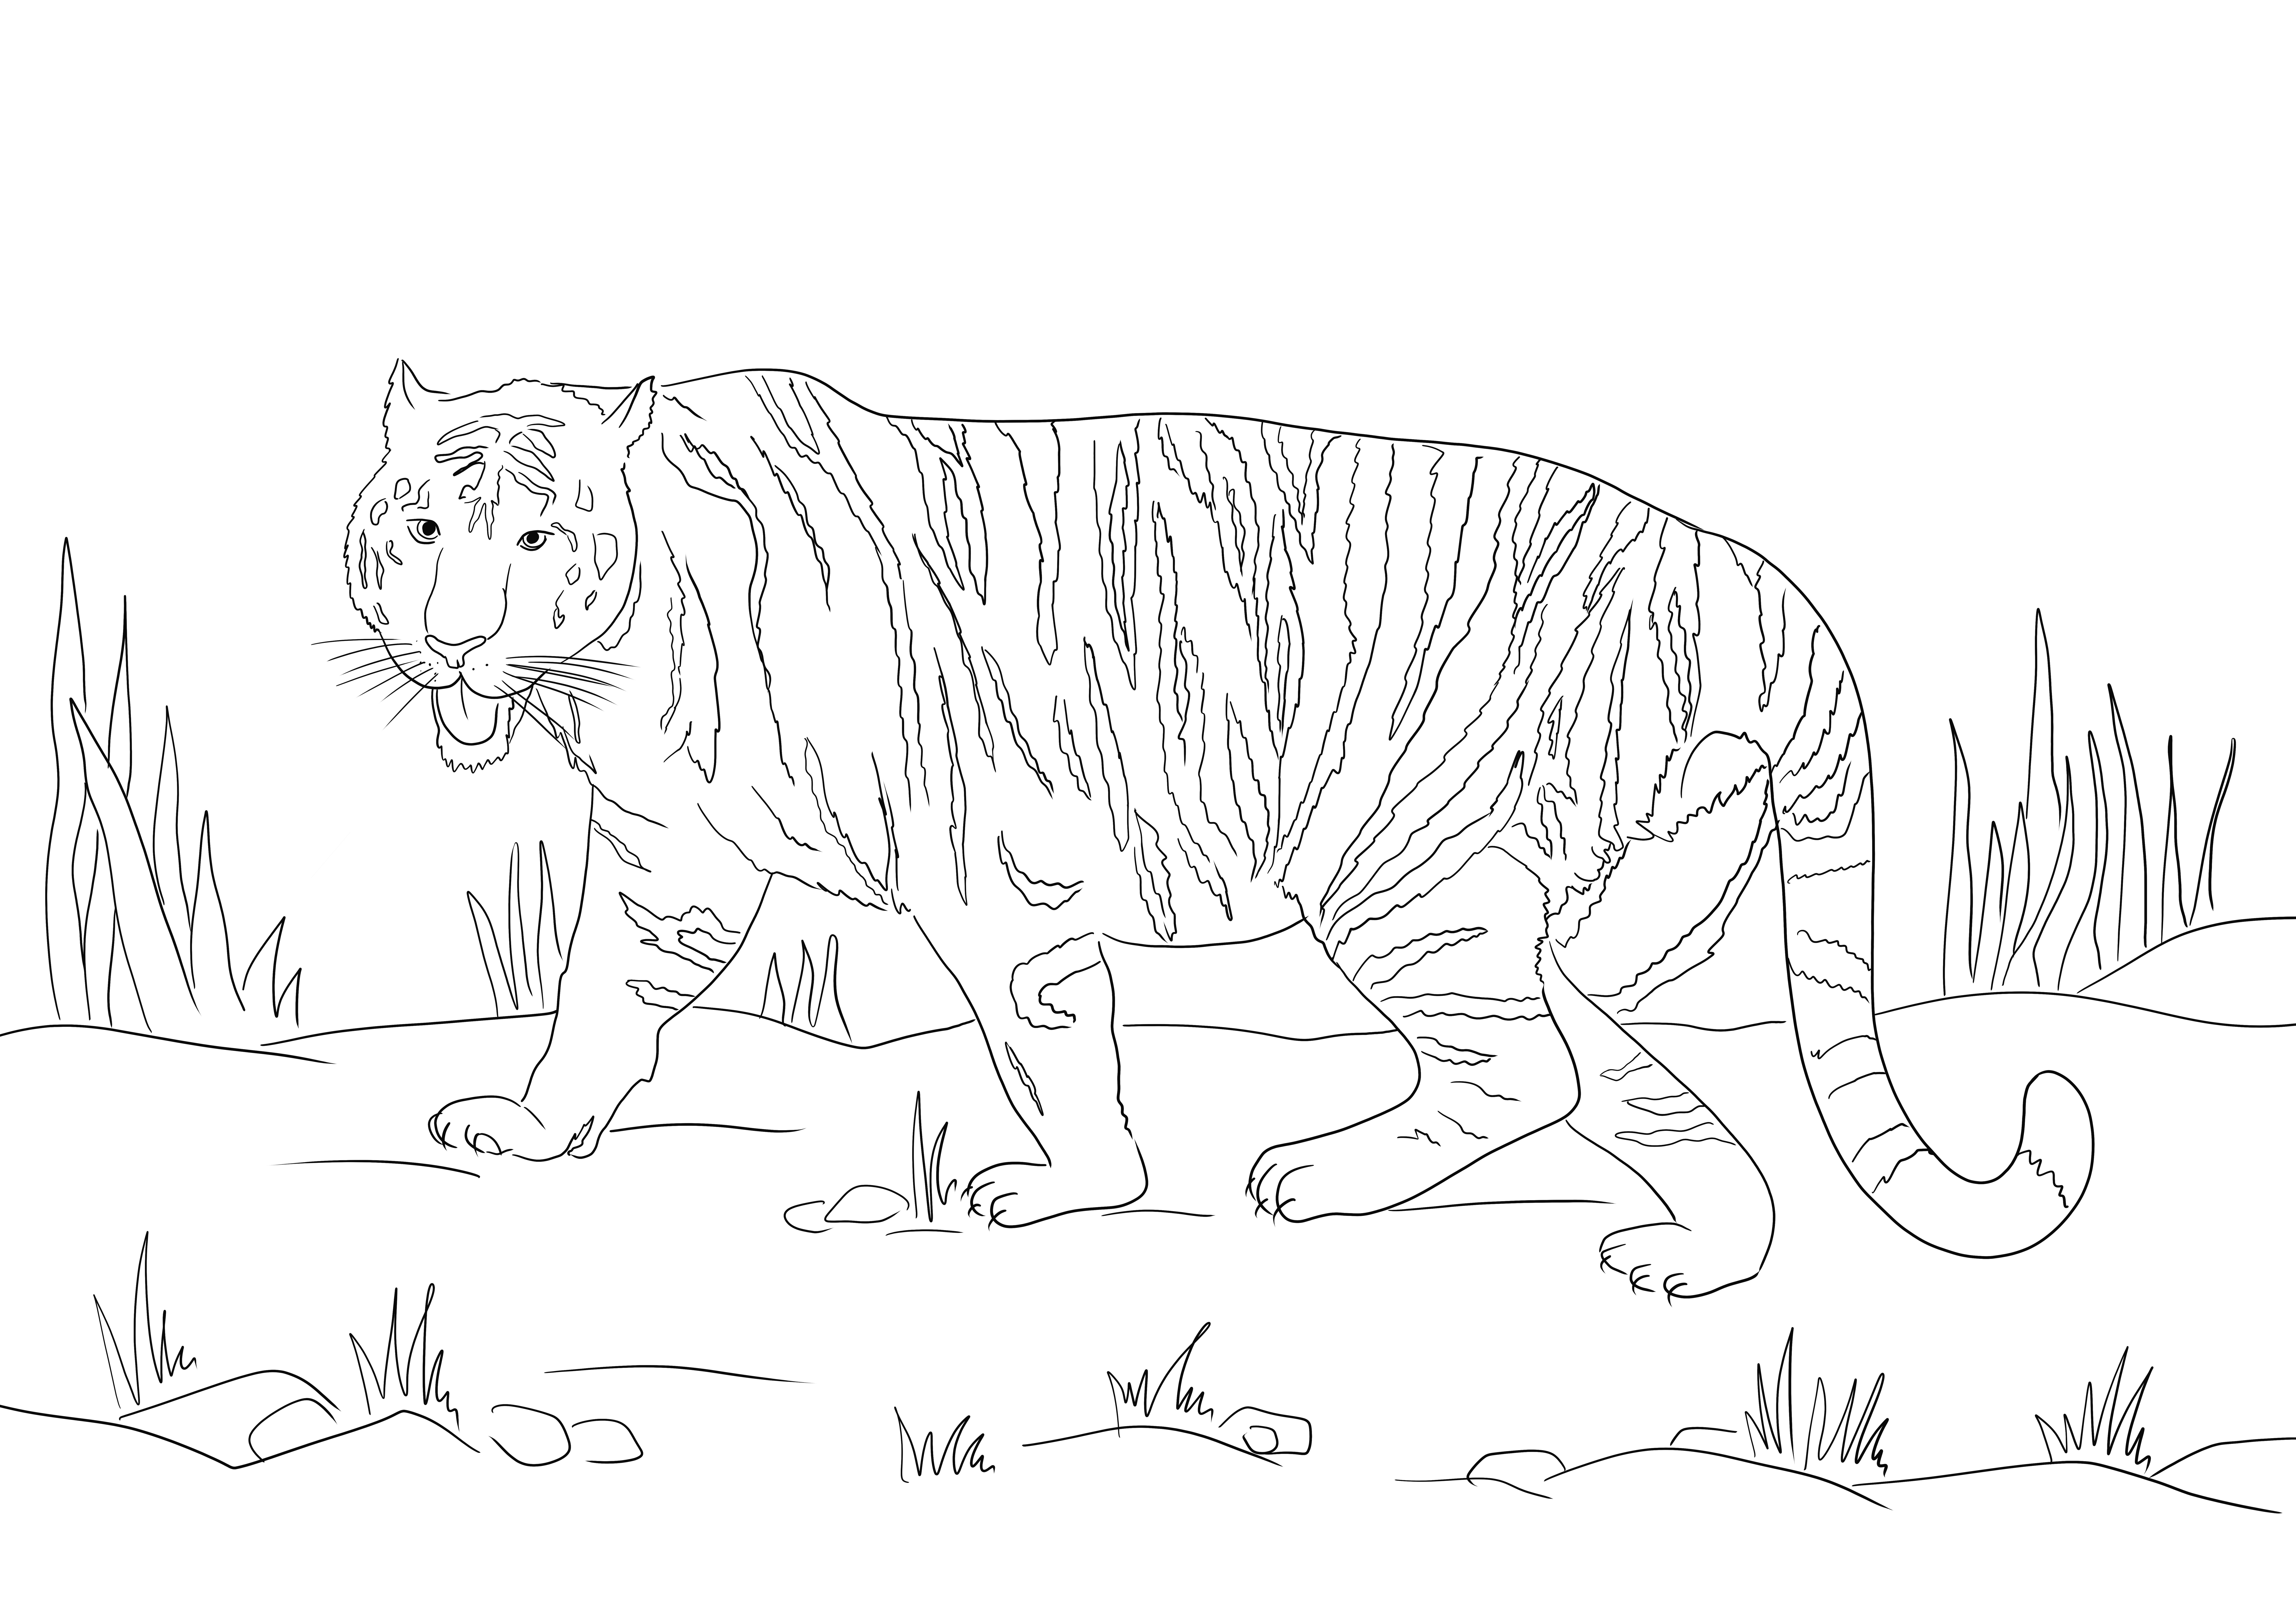 Walking tiger coloring page for free downloading and printing